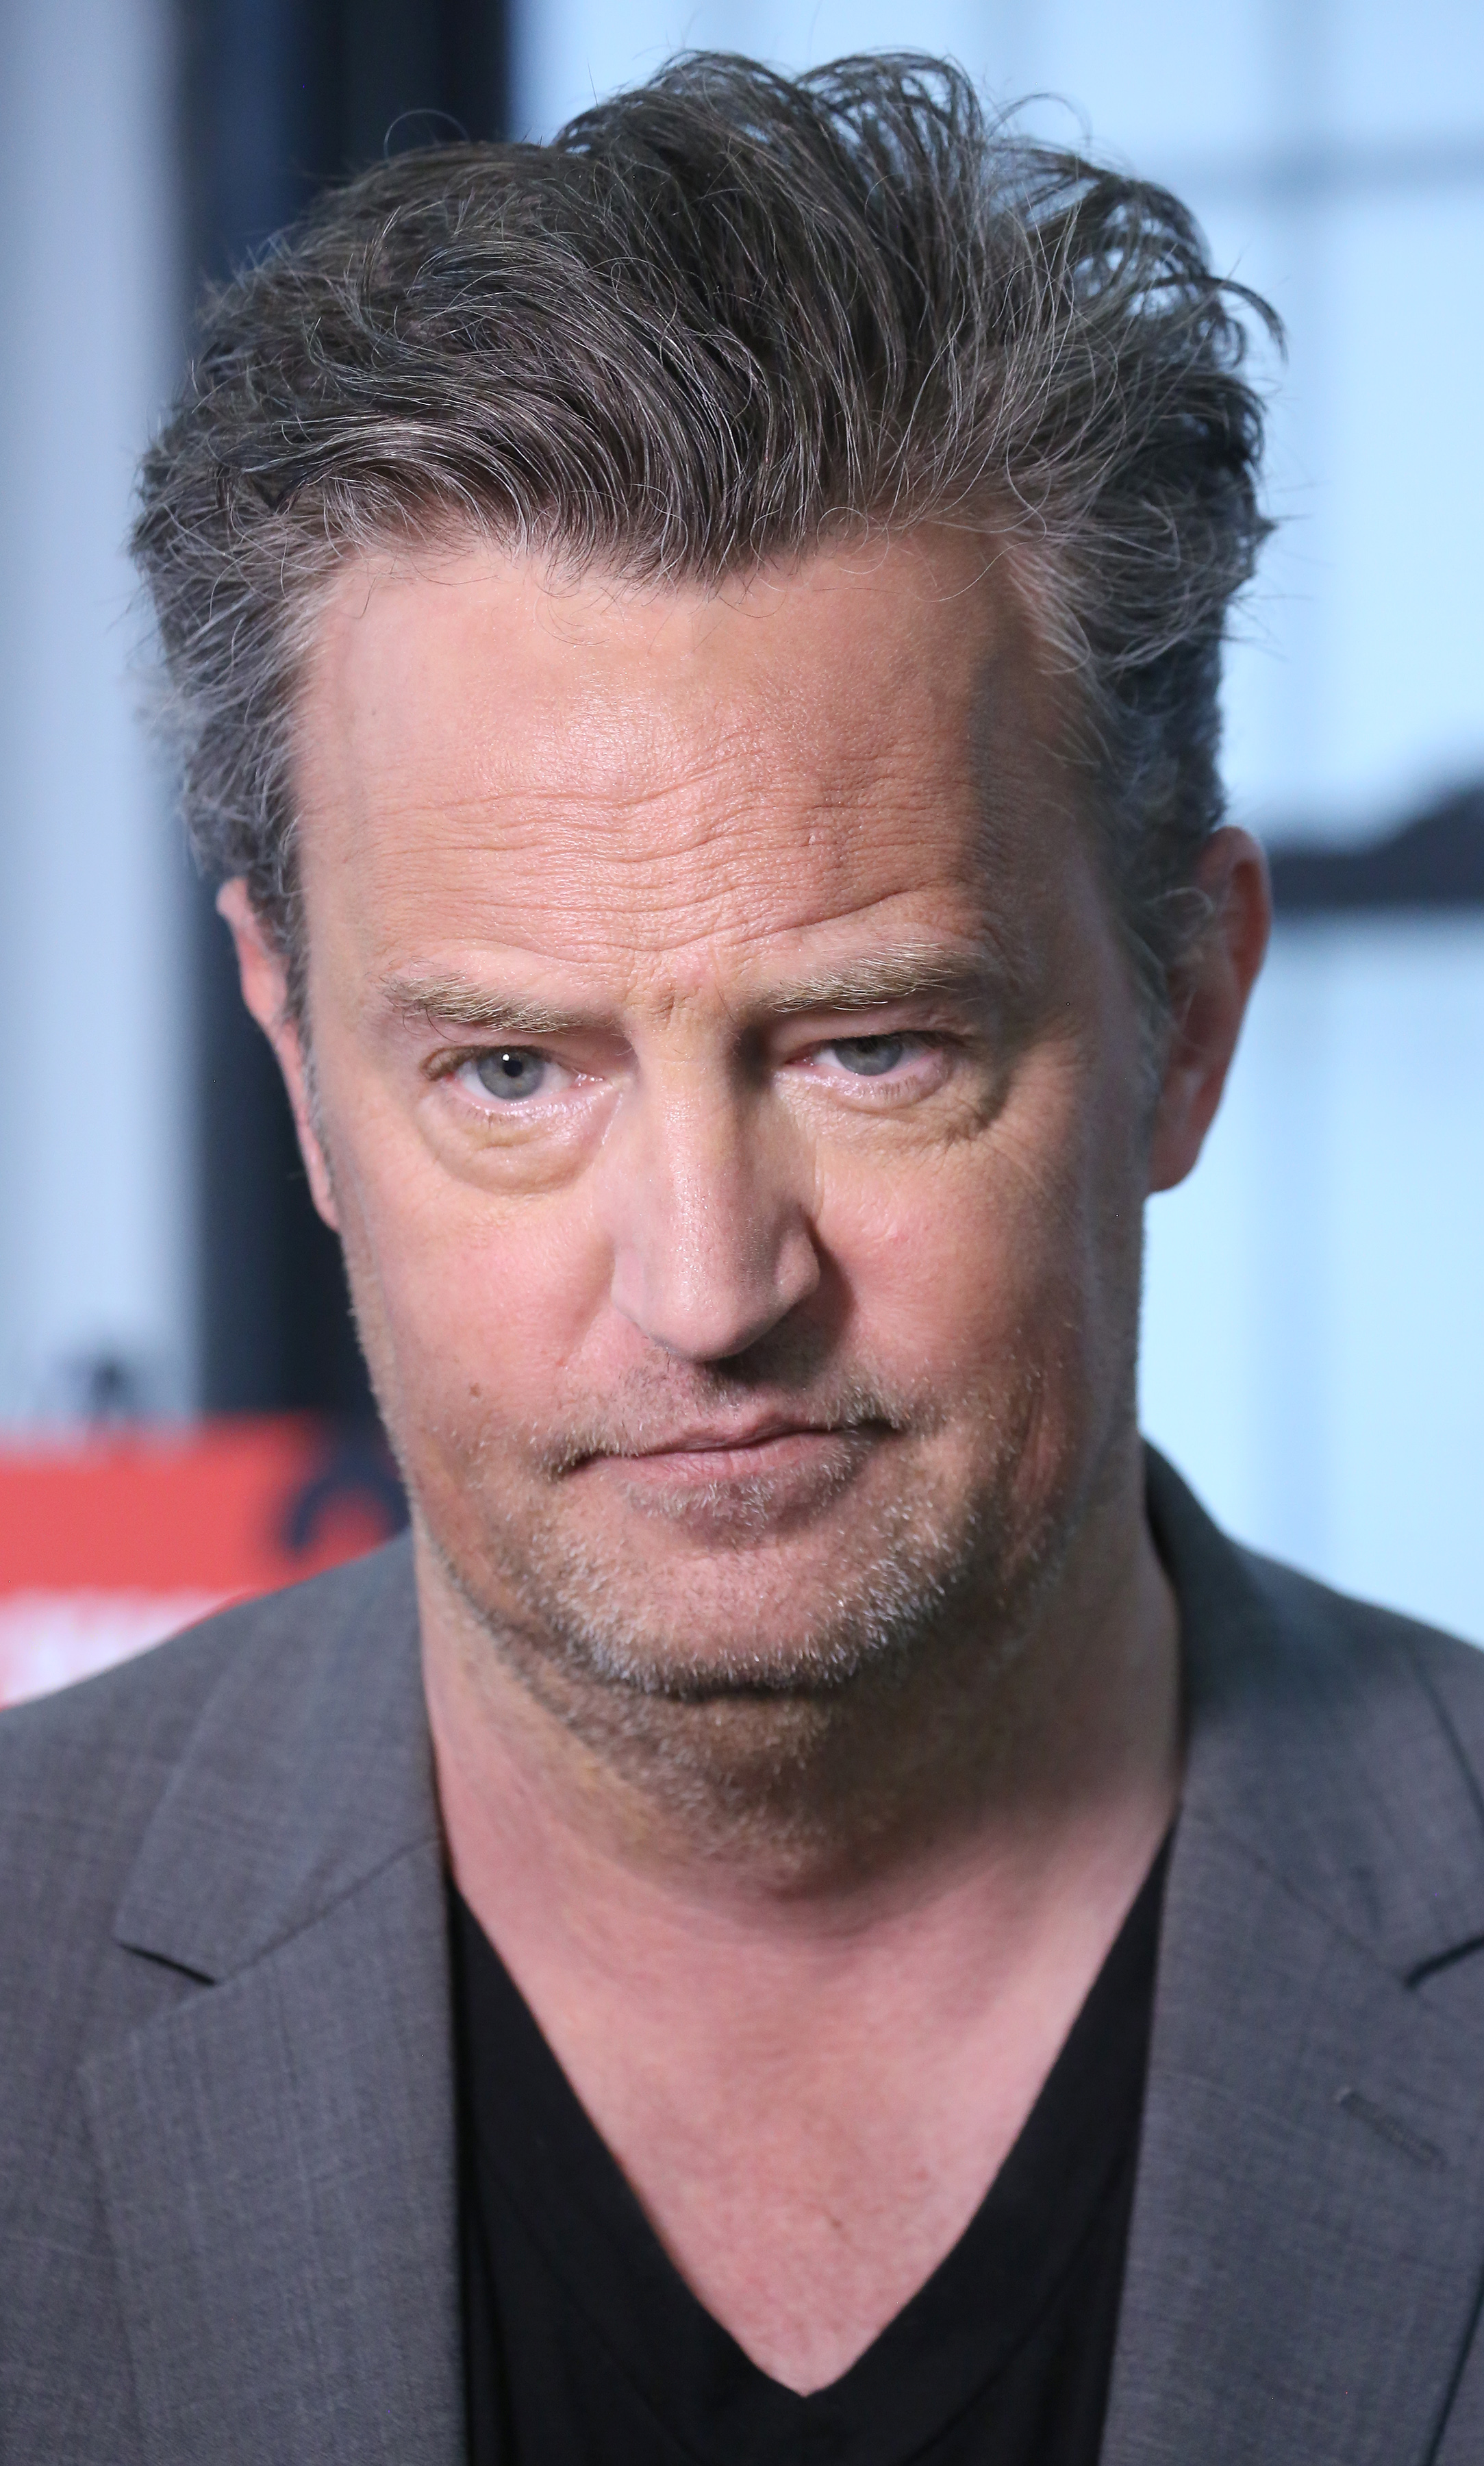 Matthew Perry at "The End Of Longing" cast photocall on April 20, 2017, in New York City | Source: Getty Images